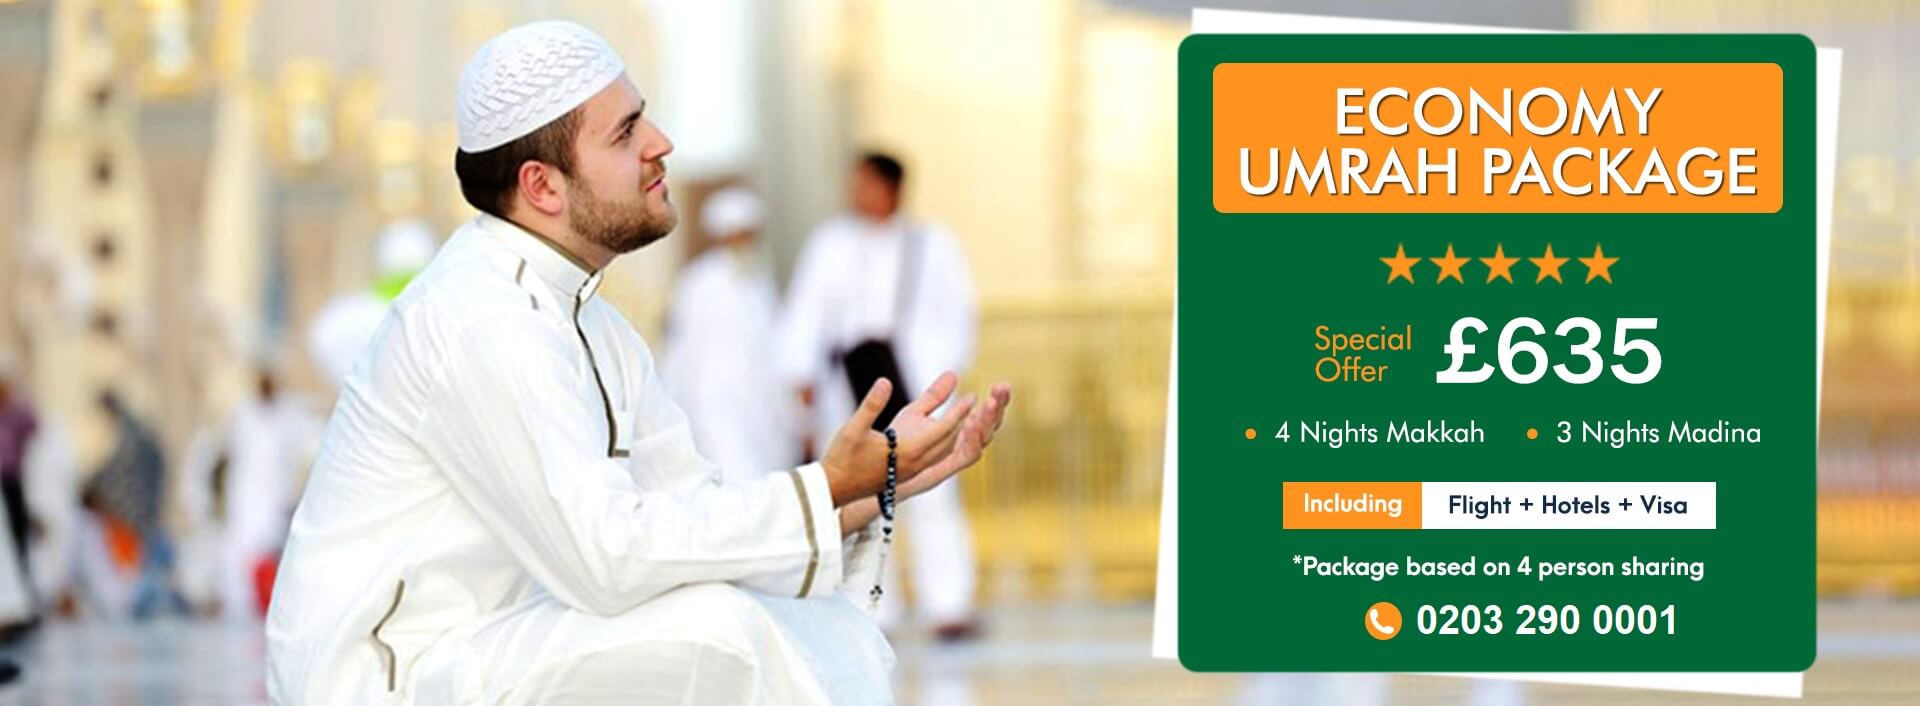 Best Cheap Hajj and Umrah Packages 2022, Umrah packages 2022, Umrah packages, cheap ramadan umrah packages, cheap umrah packages 2022, umrah packages 2022, cheap umrah packages, ramadan umrah packages 2022, cheap umrah and hajj 2022, hajj and umrah packages, easter umrah packages 2022, easter hajj and umrah packages, cheap hajj and umrah packages